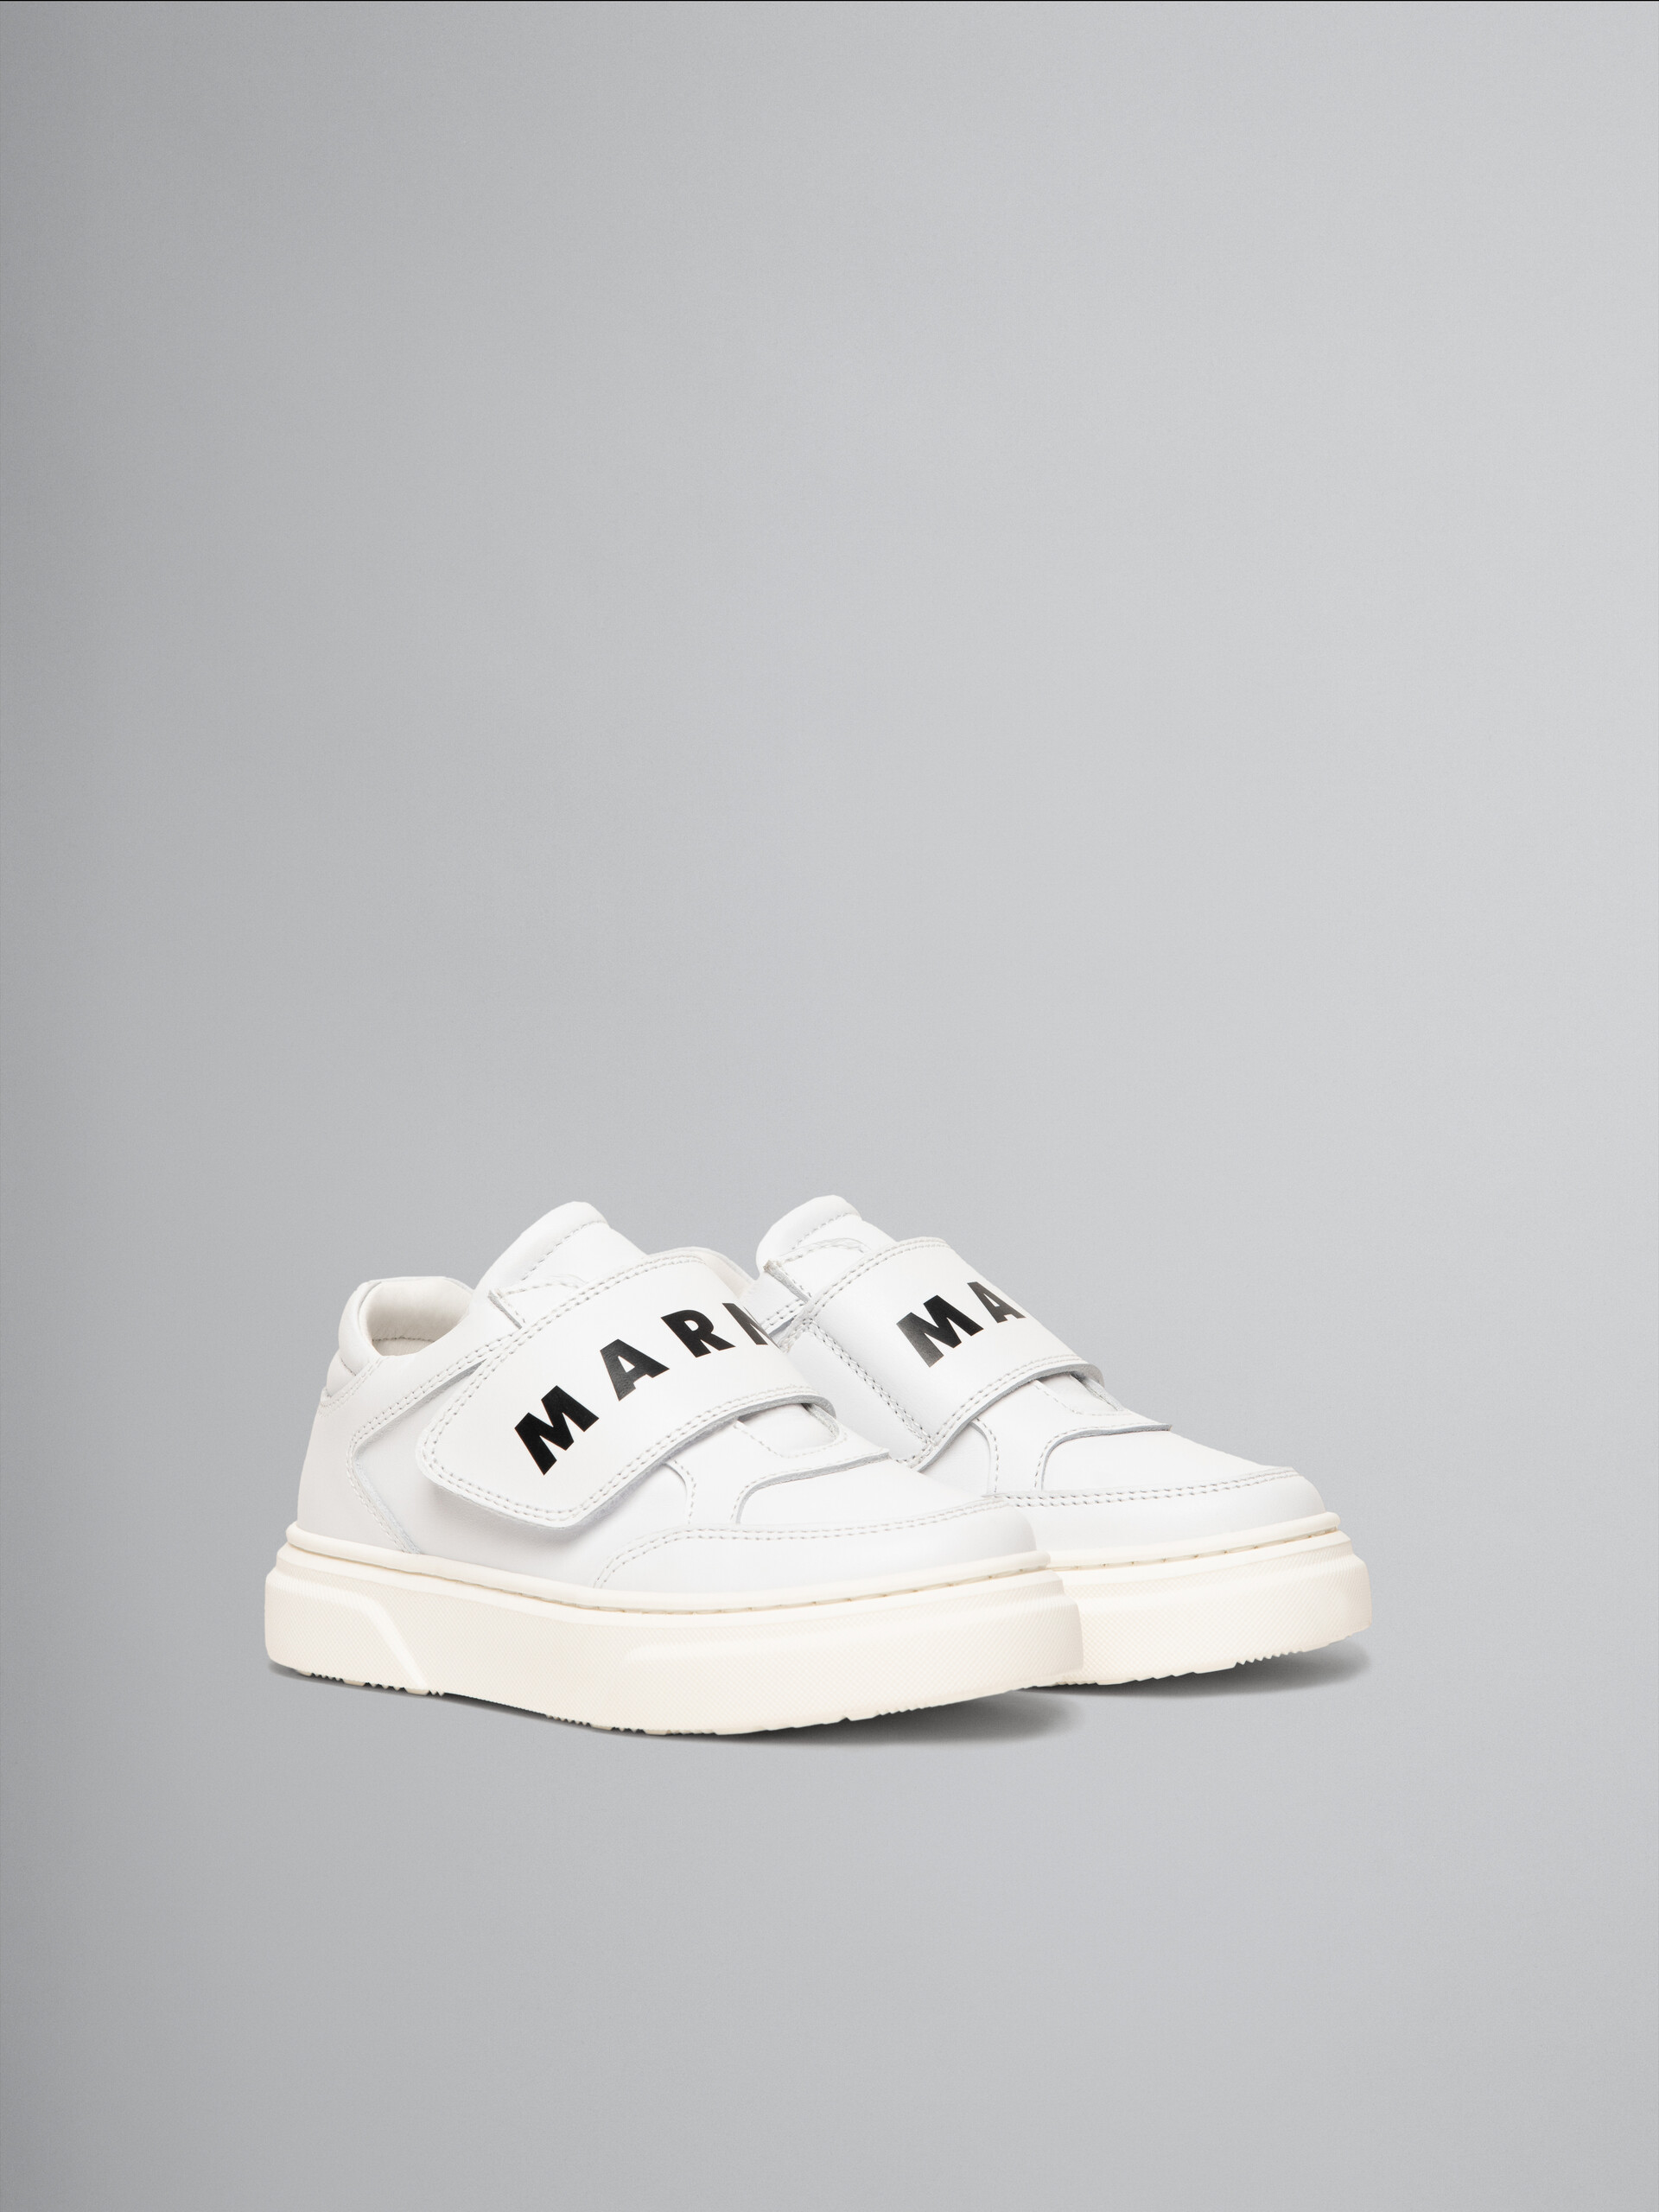 White leather sneaker with maxi strap - Other accessories - Image 2